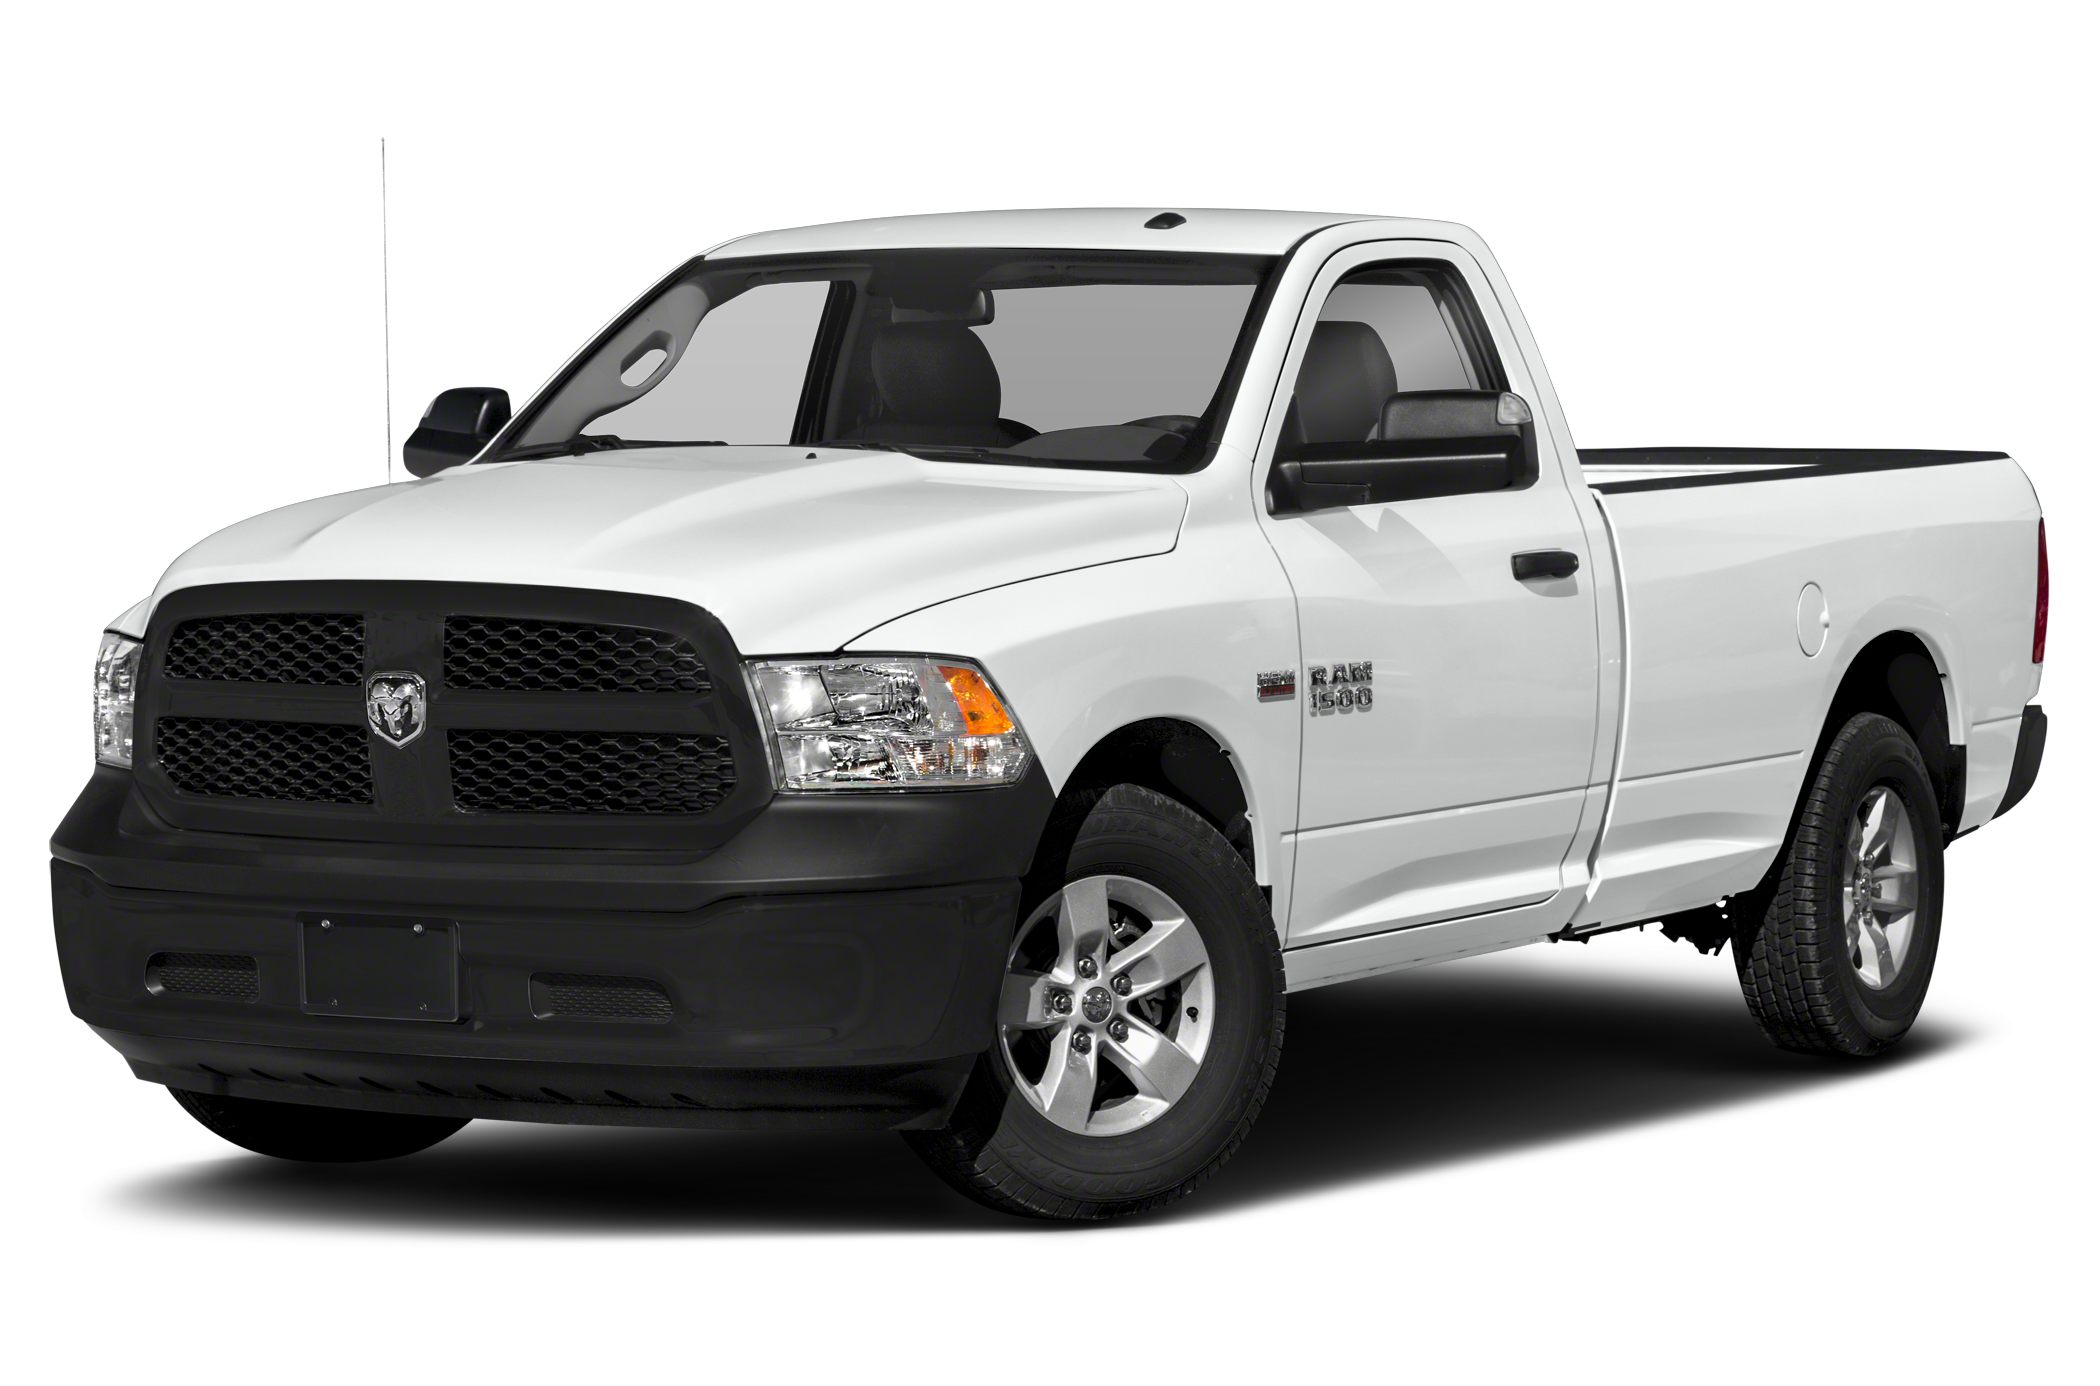 2018 Ram 1500 Tradesman Express 4x2 Regular Cab 120 In Wb Pictures